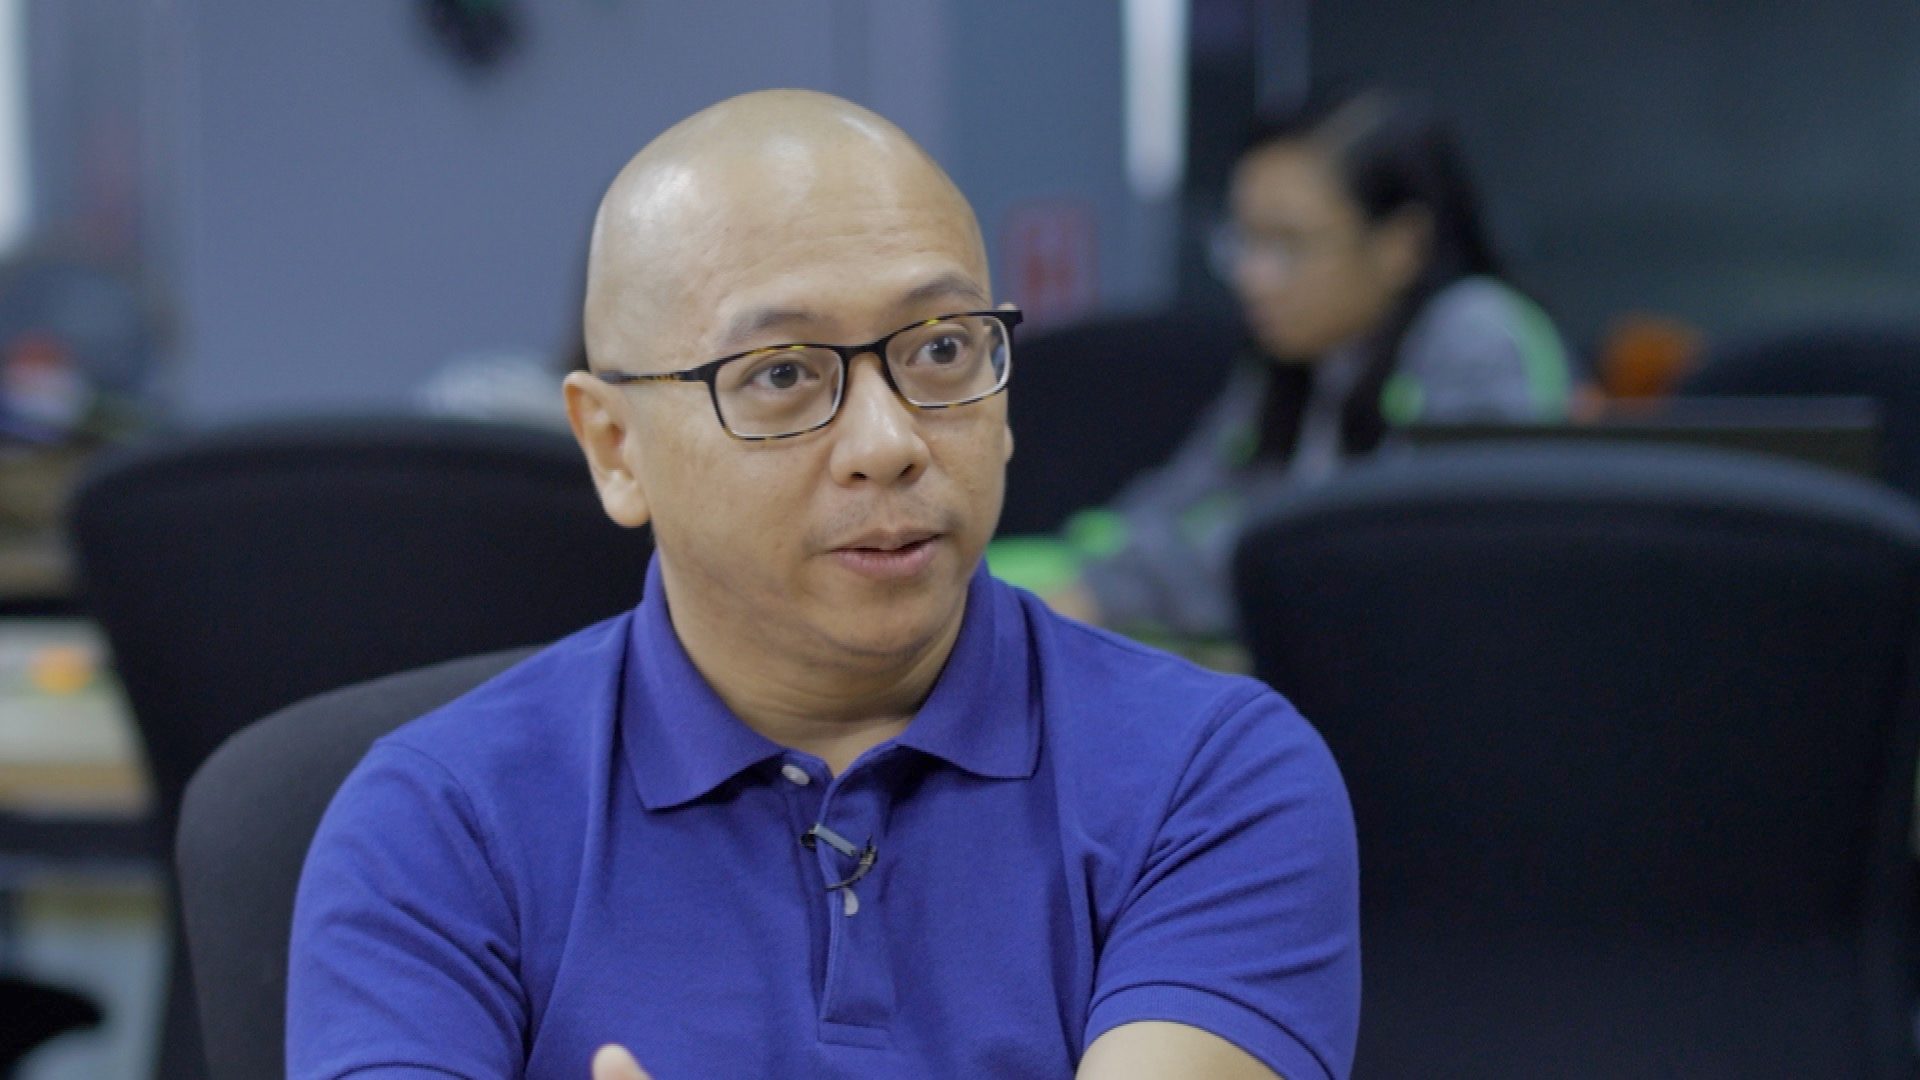 Aquino gov’t failed to communicate gains effectively, Hilbay says